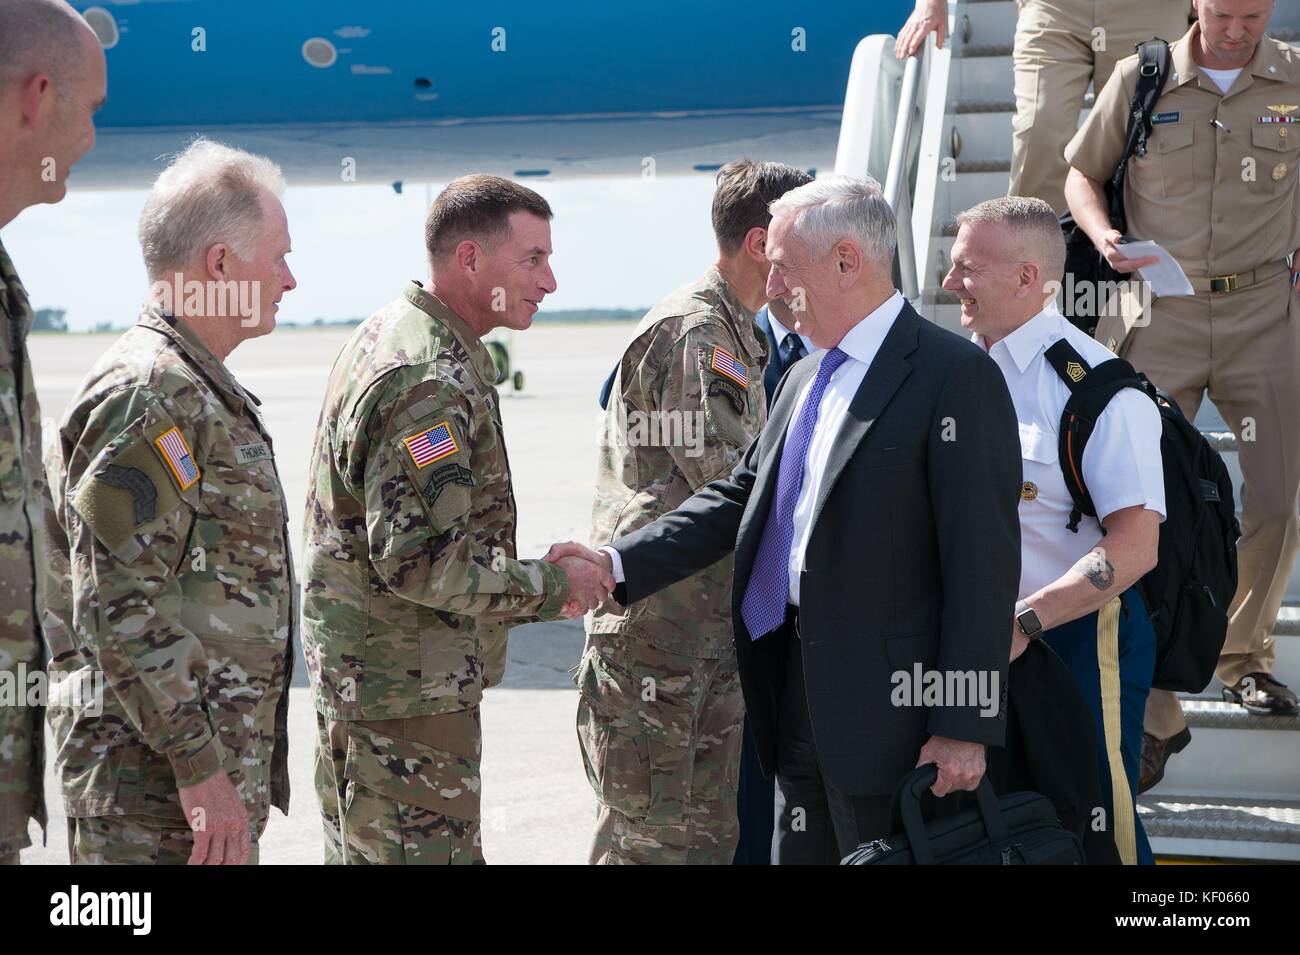 U.S. Defense Secretary James Mattis and U.S. Advisor to the Chairman of the Joint Chiefs of Staff John Troxell arrive at the MacDill Air Force Base October 11, 2017 in Tampa, Florida. Stock Photo